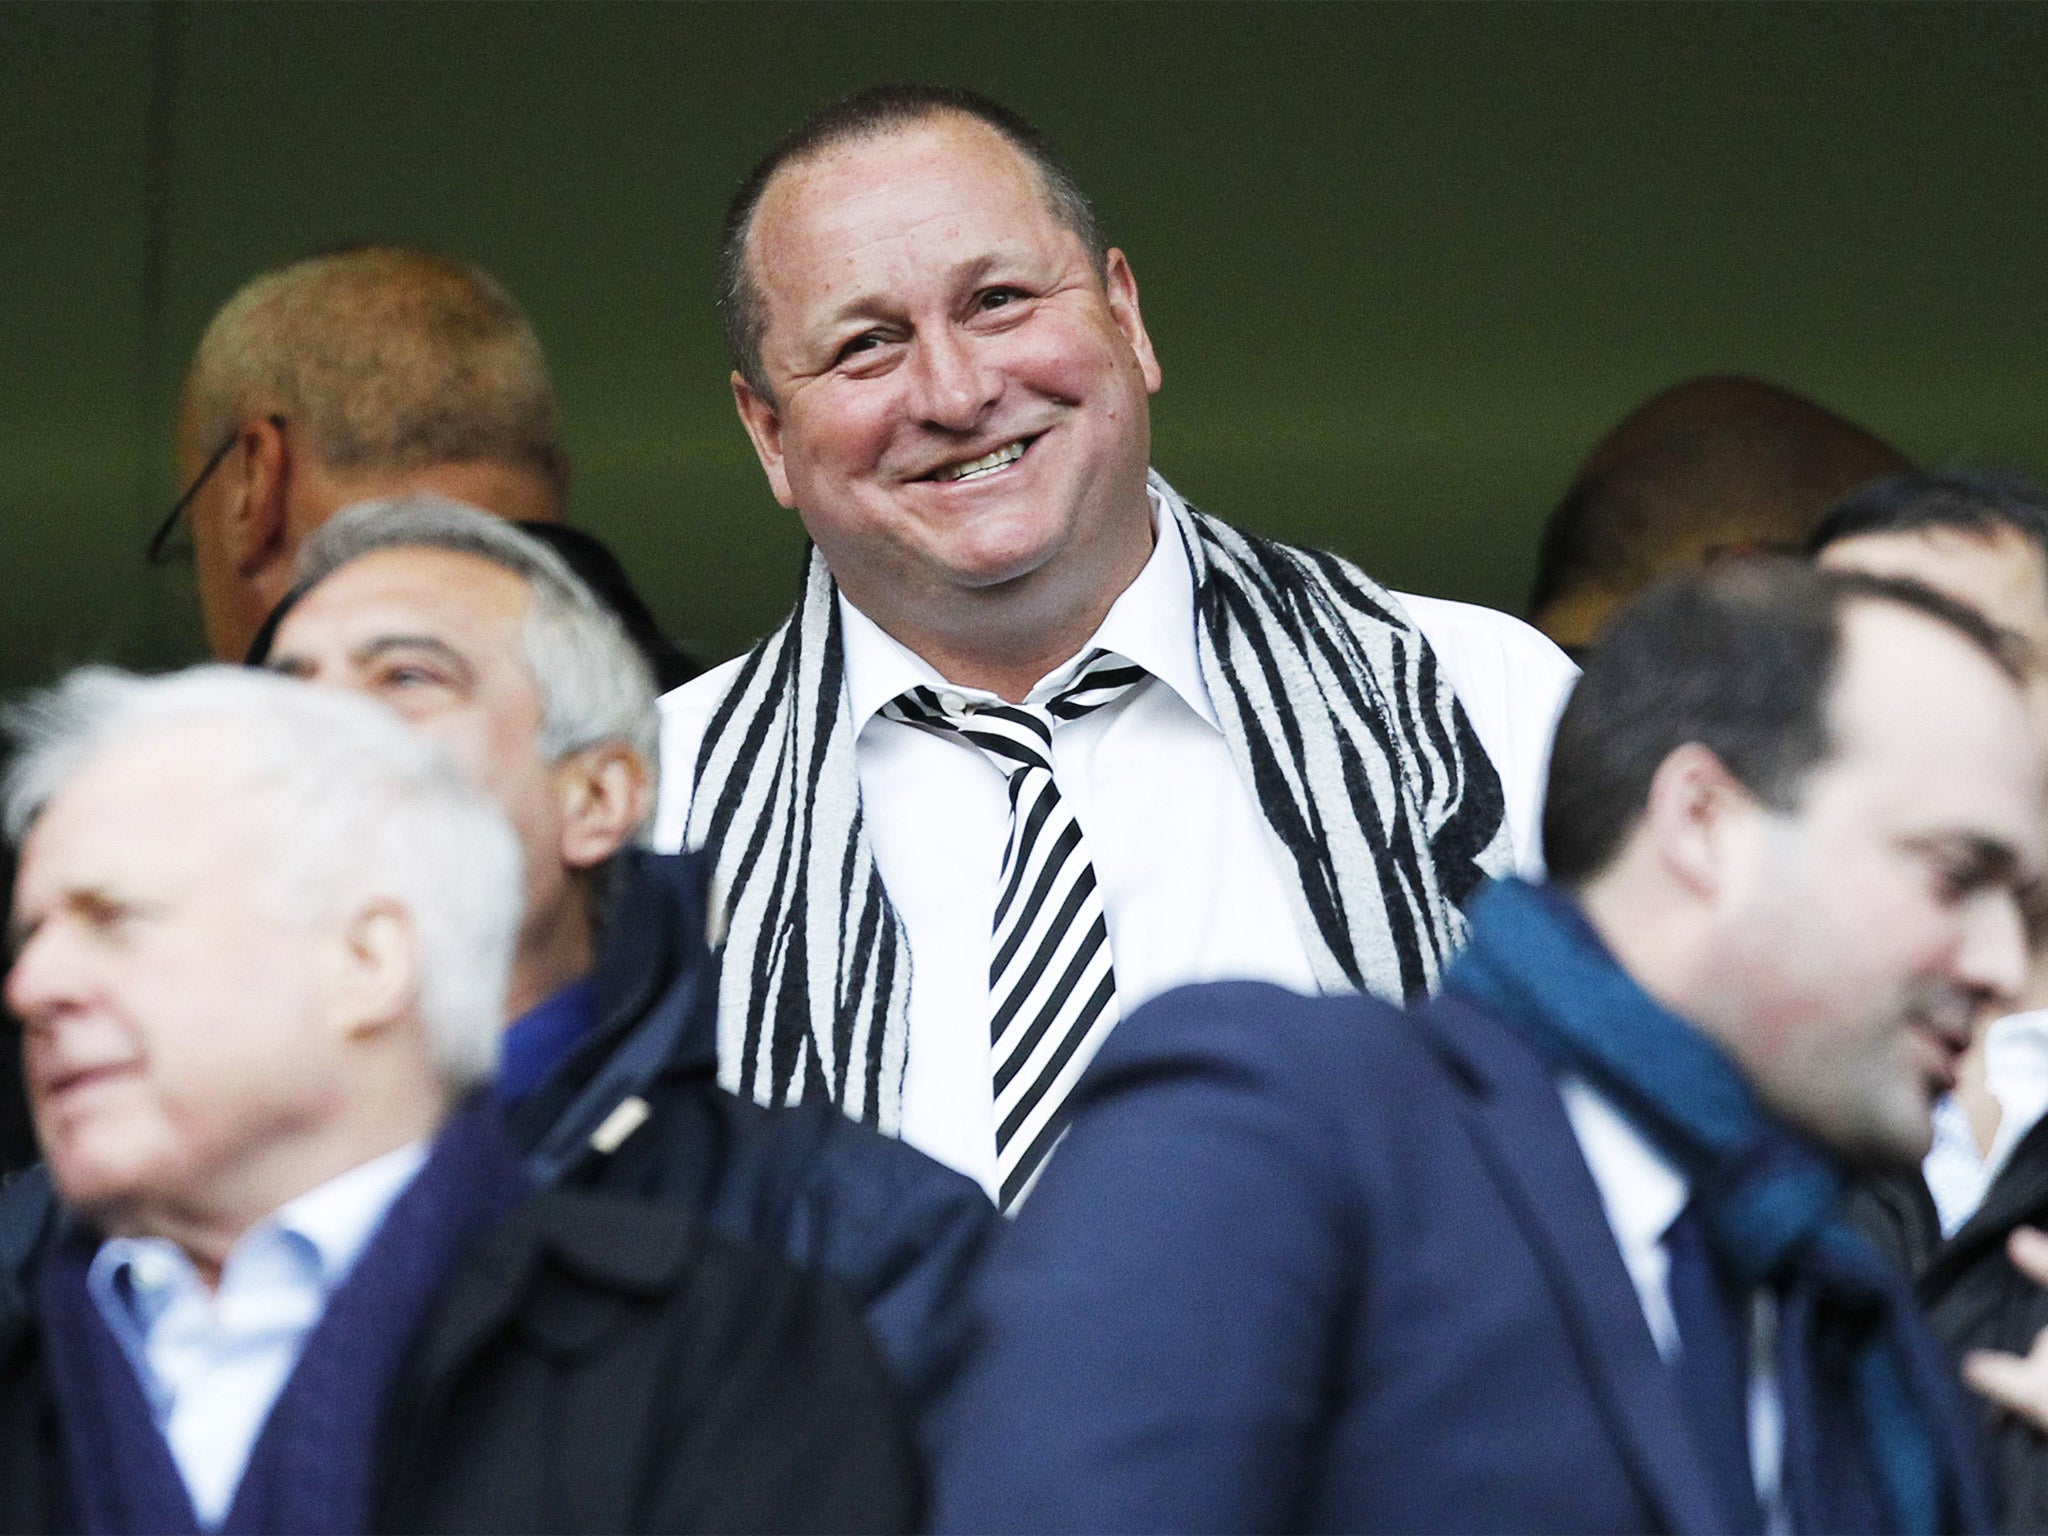 Newcastle remain £129m in debt to owner Mike Ashley